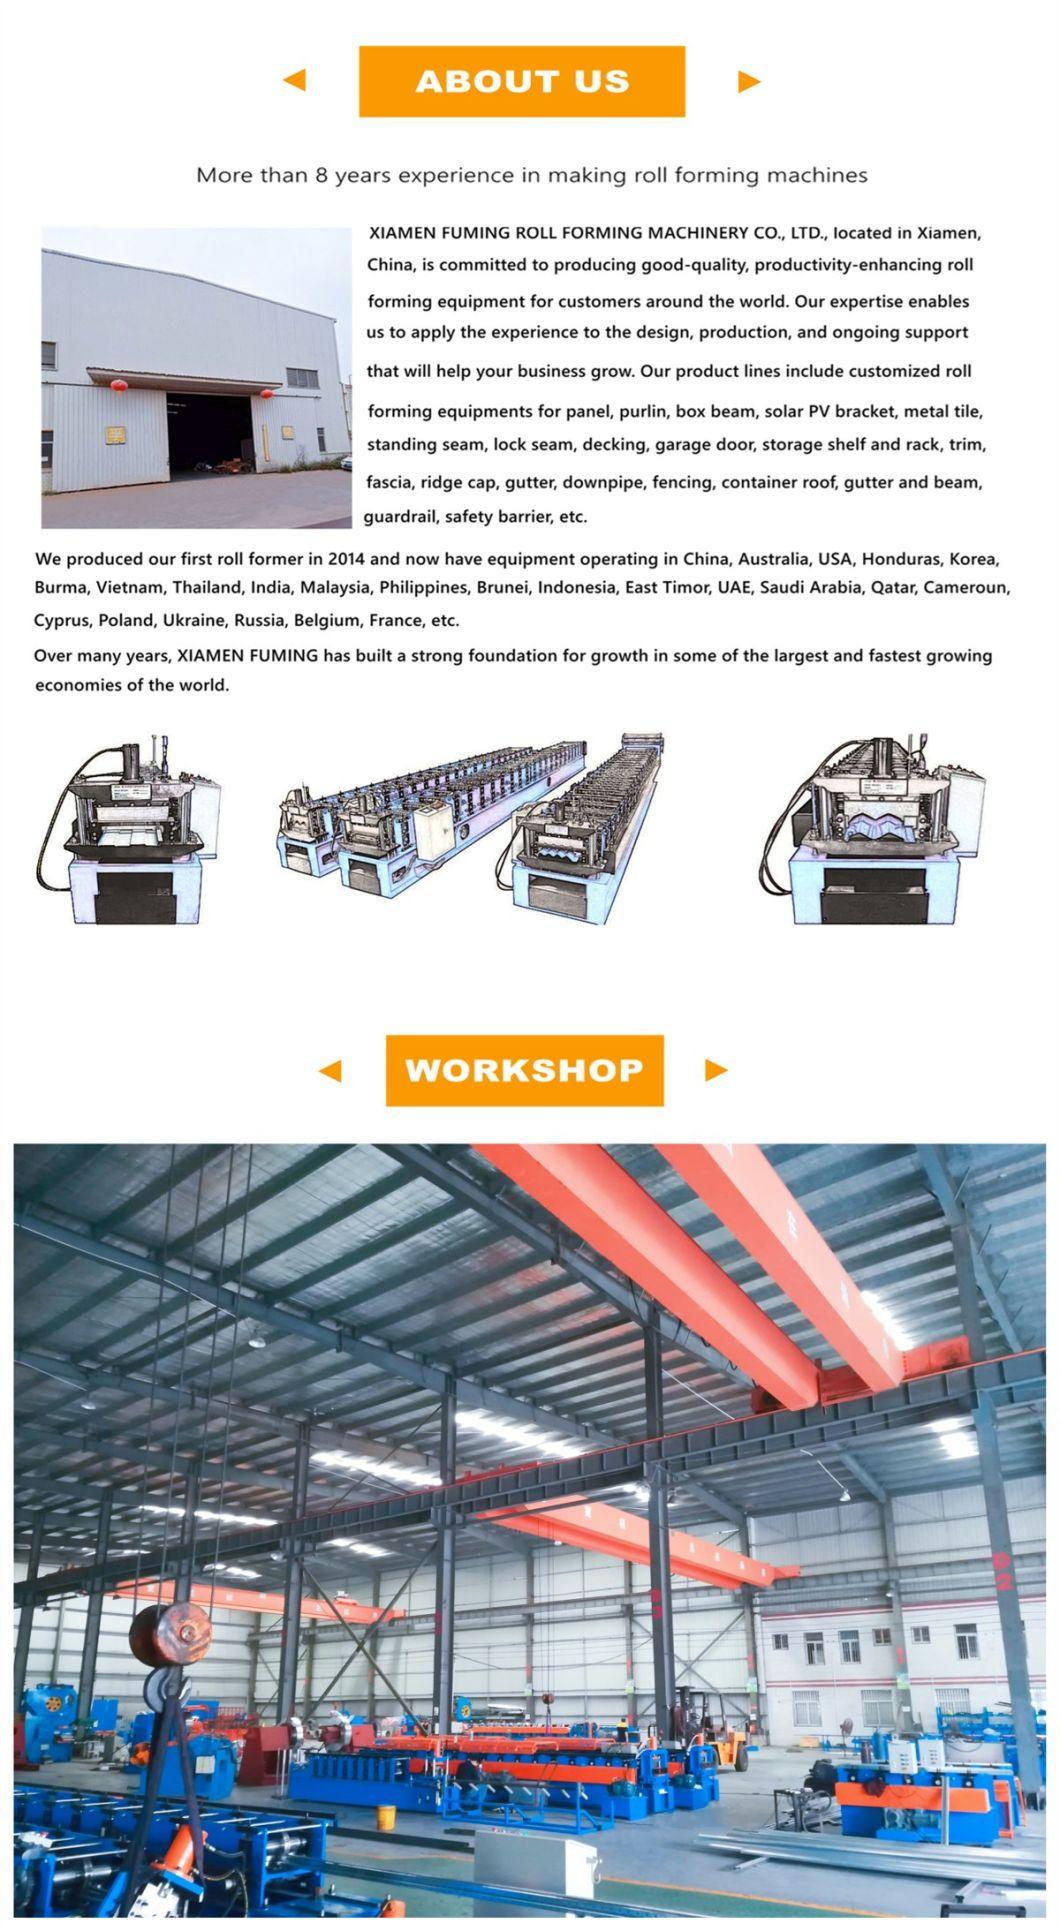 Dual Level Machine for Yx31.75-304.8-914.4/Yx33-134-804/938 Roof Profiles